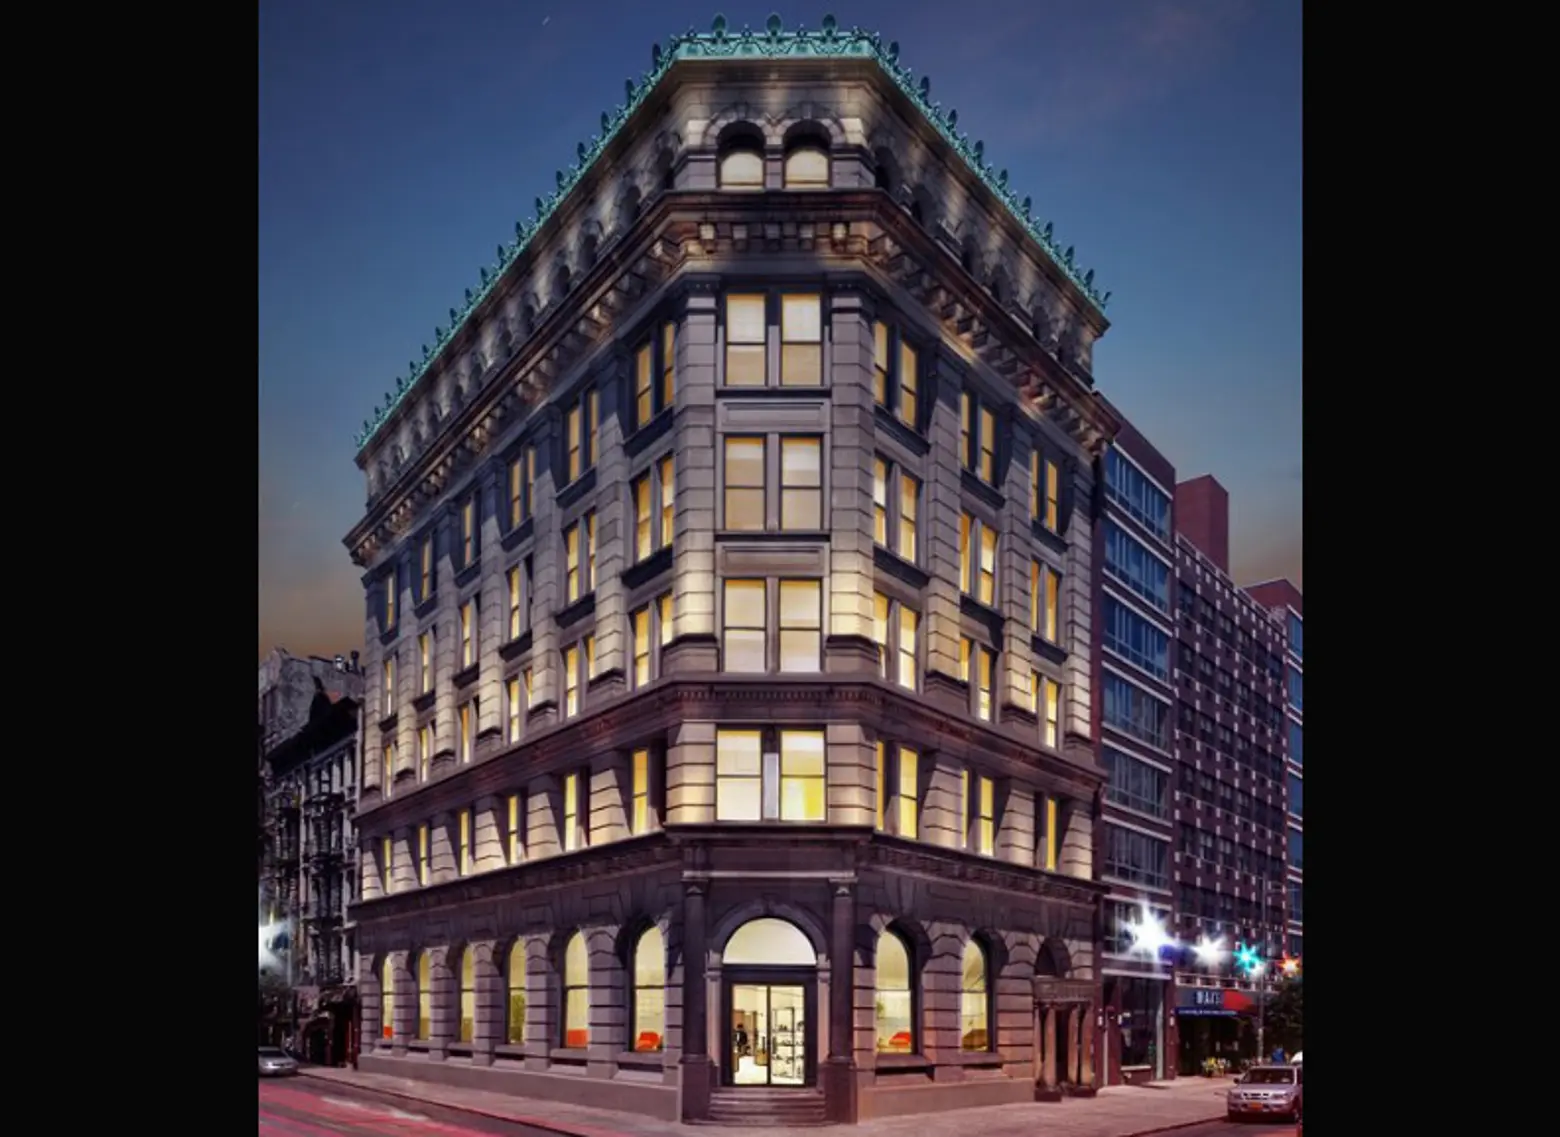 New Rendering of 190 Bowery Gives Us a Look at the Mysterious Building Graffiti-Free